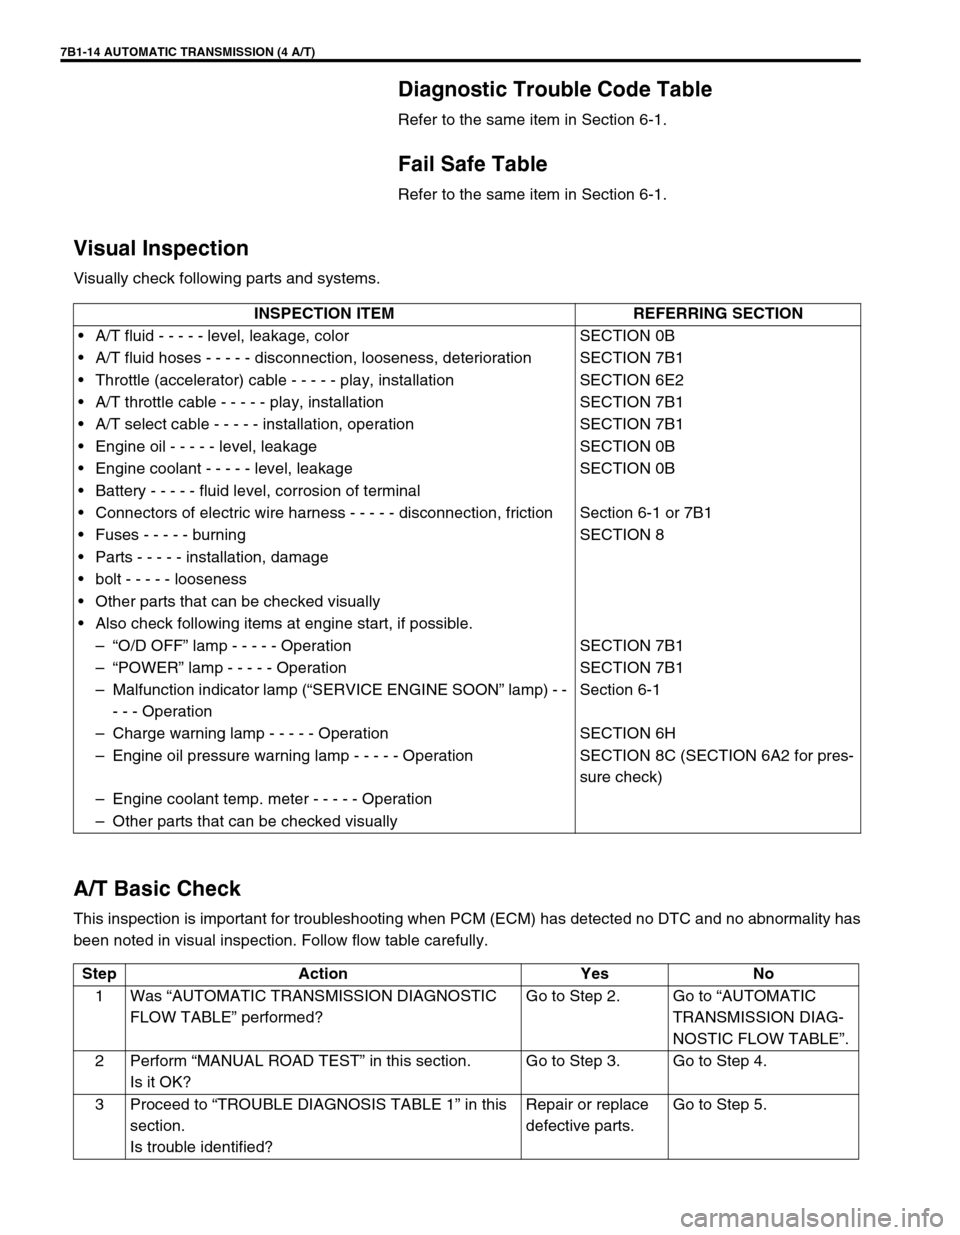 SUZUKI GRAND VITARA 2001 2.G Owners Guide 7B1-14 AUTOMATIC TRANSMISSION (4 A/T)
Diagnostic Trouble Code Table
Refer to the same item in Section 6-1.
Fail Safe Table
Refer to the same item in Section 6-1.
Visual Inspection
Visually check follo